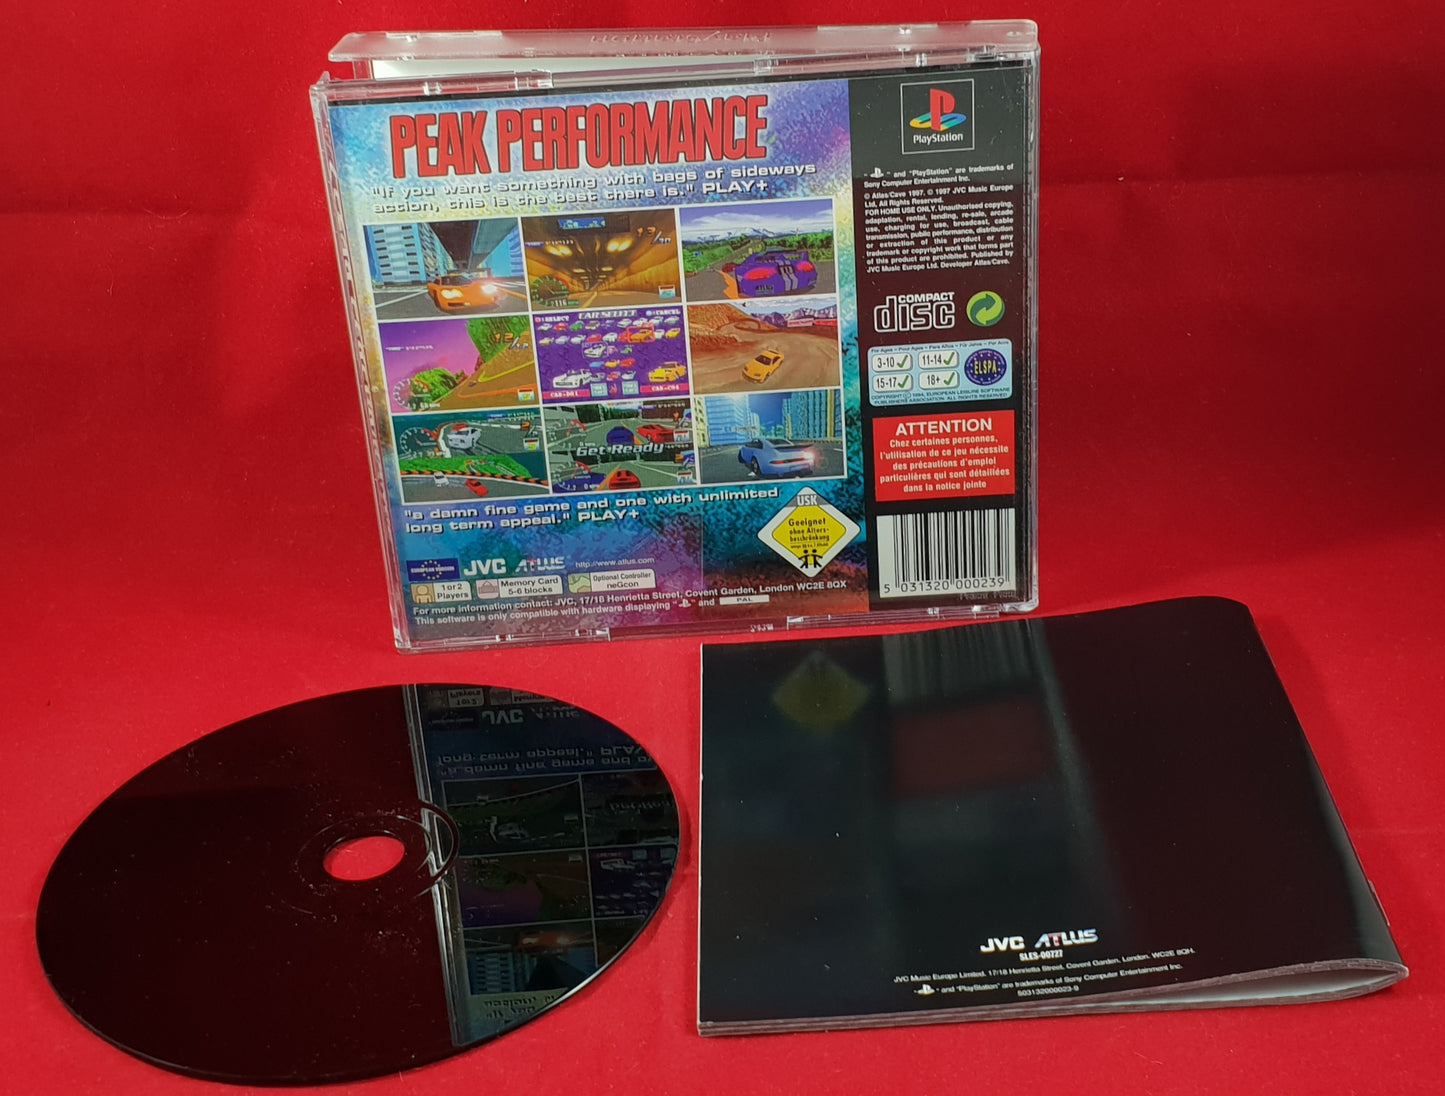 Peak Performance Sony Playstation 1 (PS1) RARE Game